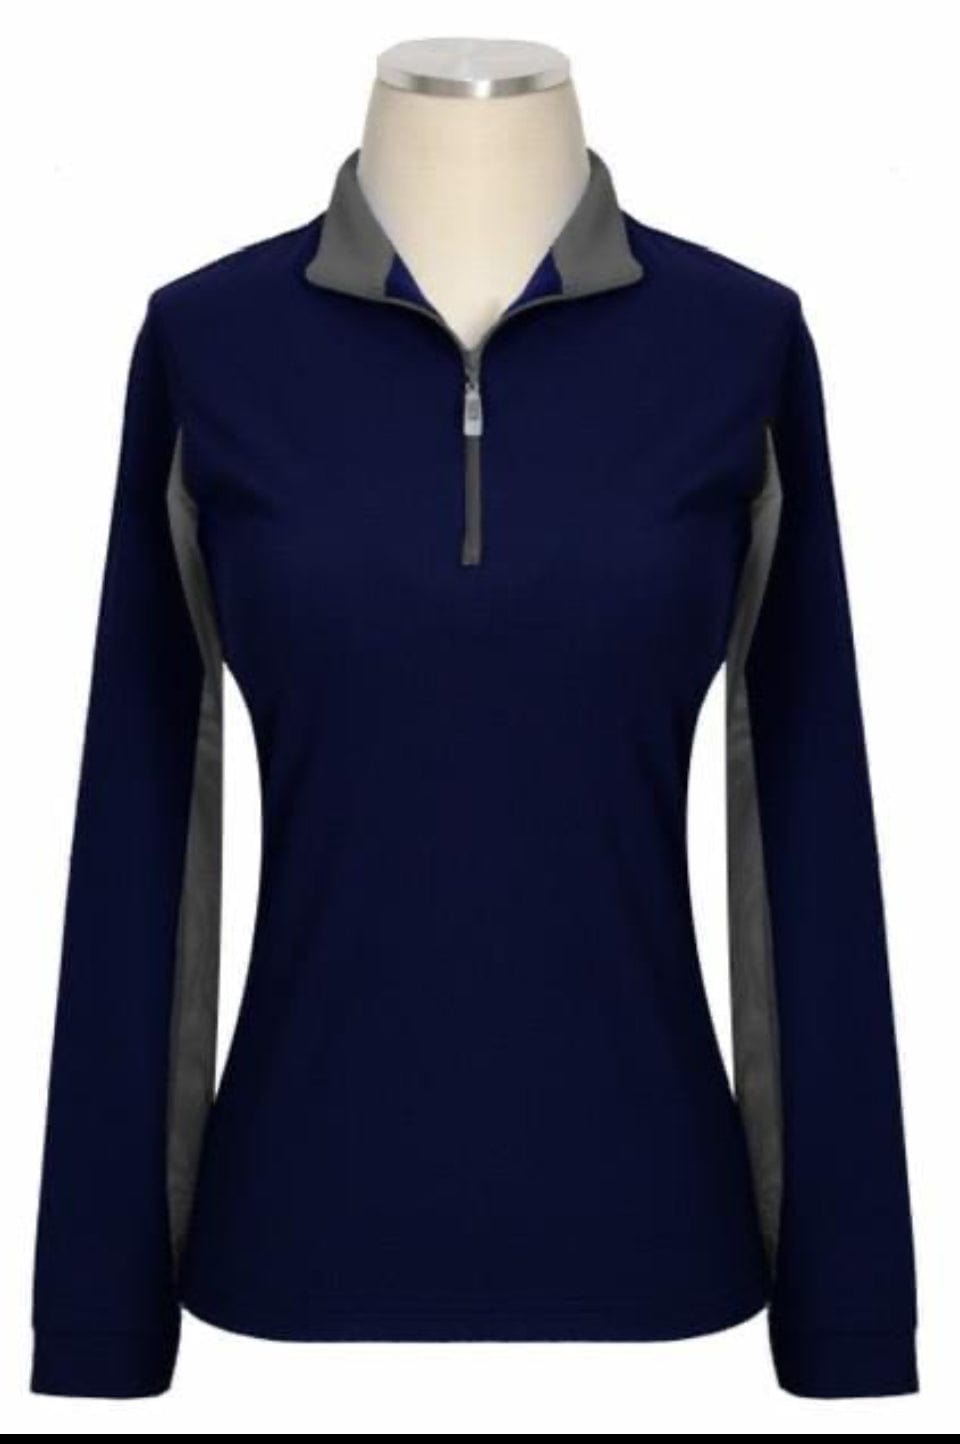 EIS Youth Shirt Navy/Grey EIS- Sun Shirts Youth Large 8-10 equestrian team apparel online tack store mobile tack store custom farm apparel custom show stable clothing equestrian lifestyle horse show clothing riding clothes ETA Kids Equestrian Fashion | EIS Sun Shirts horses equestrian tack store